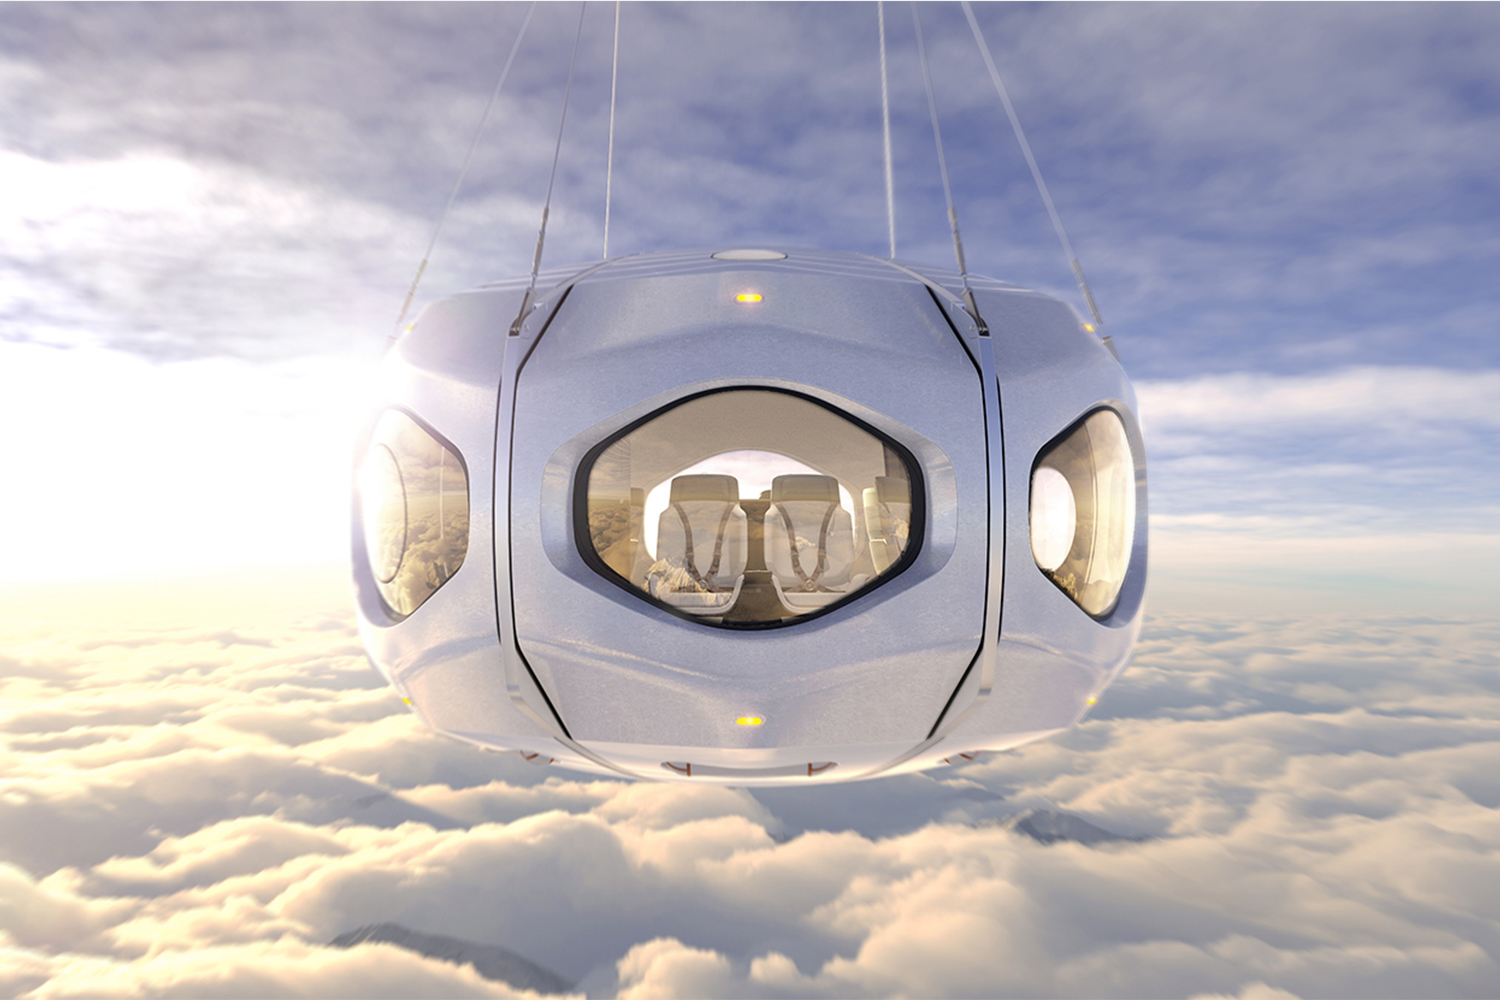 A rendering of the World View space tourism capsule that will fly with a stratospheric balloon